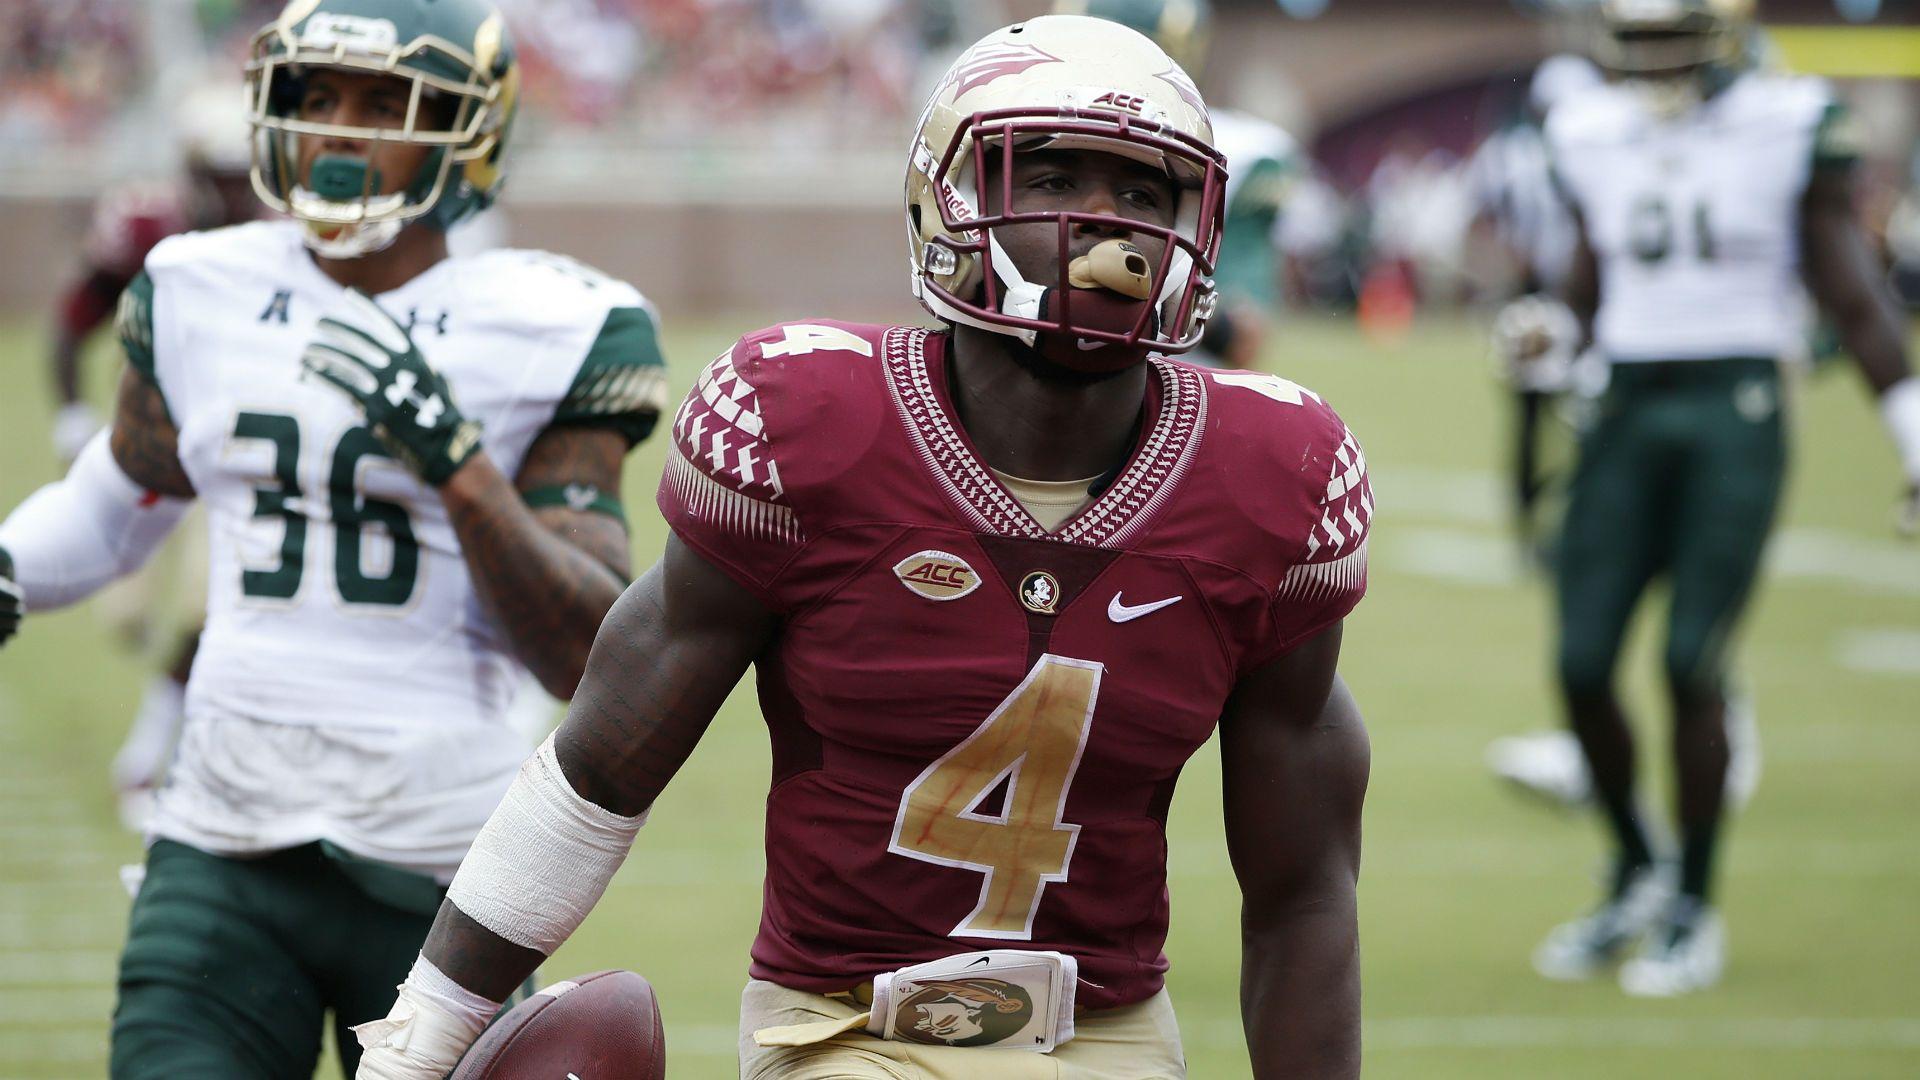 Watch Florida State's Dalvin Cook Torch USF With 74 Yard Touchdown